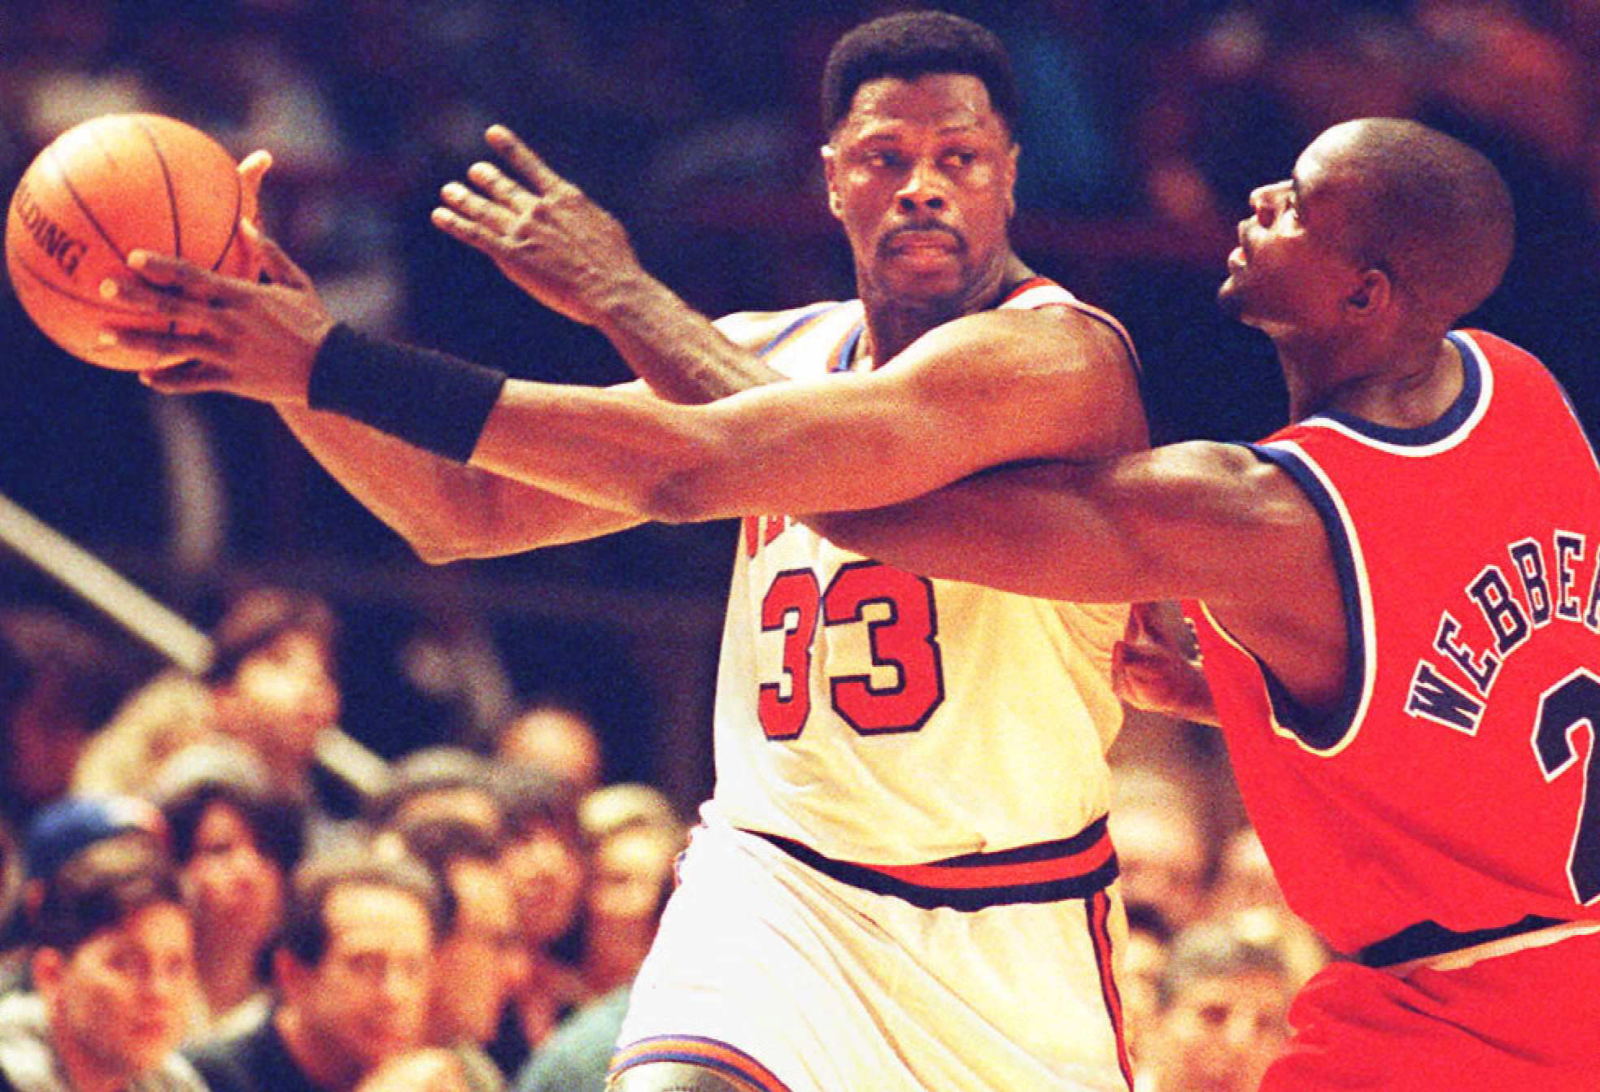 This Day in Knicks History: Patrick Ewing makes his NBA debut, 35 years  ago today, No. 3️⃣3️⃣ made his Knick debut. 18 PTS, 6 REB, 3 BLK, By New  York Knicks